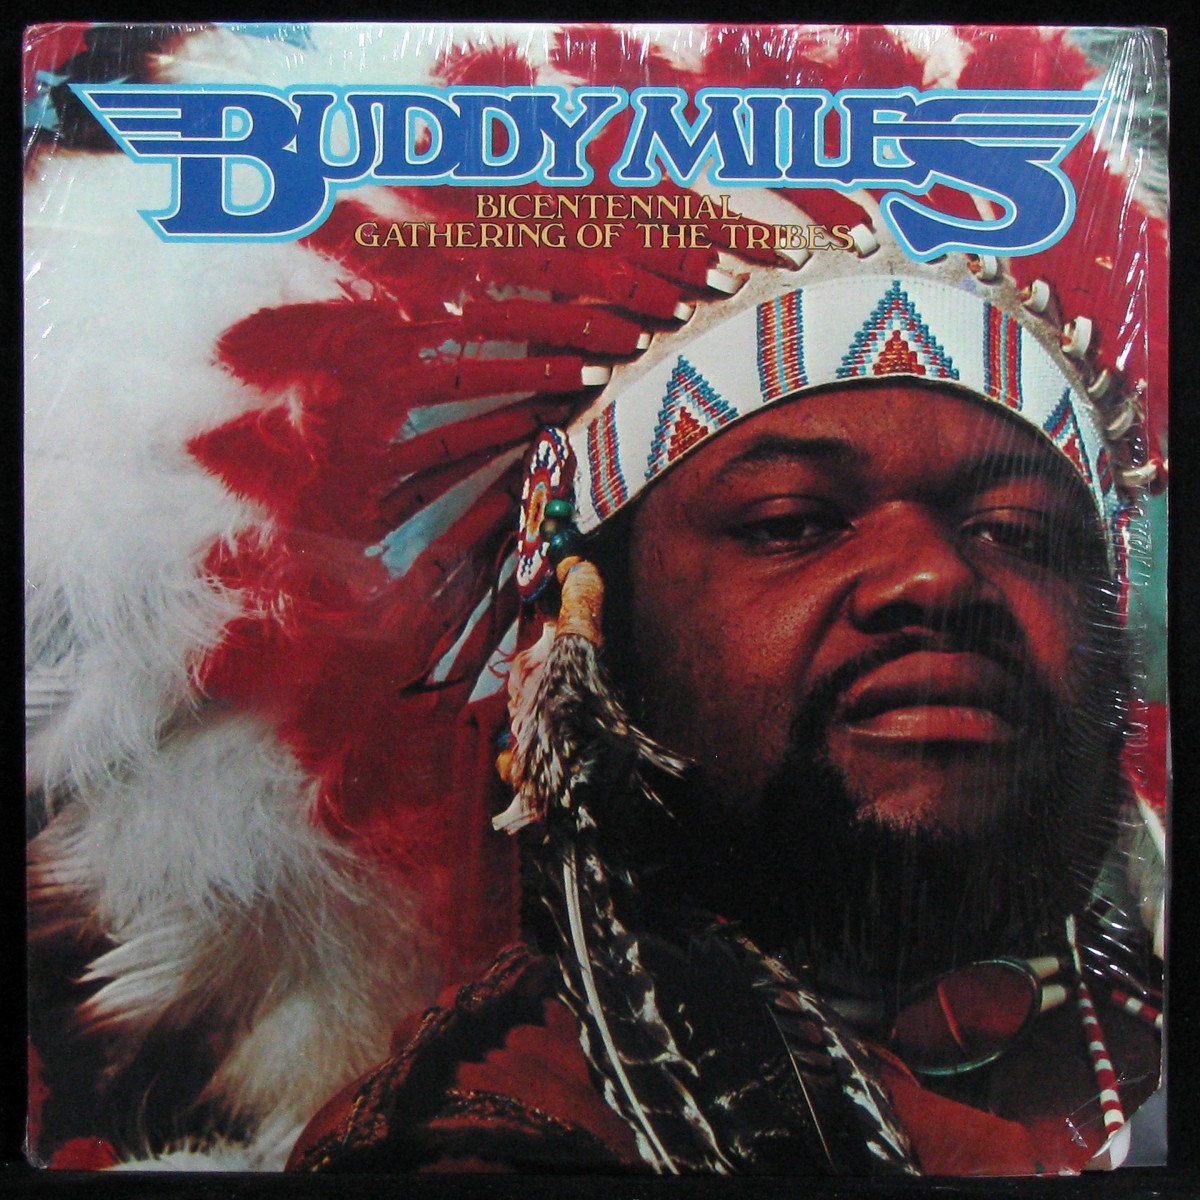 LP Buddy Miles — Bicentennial Gathering Of The Tribes фото